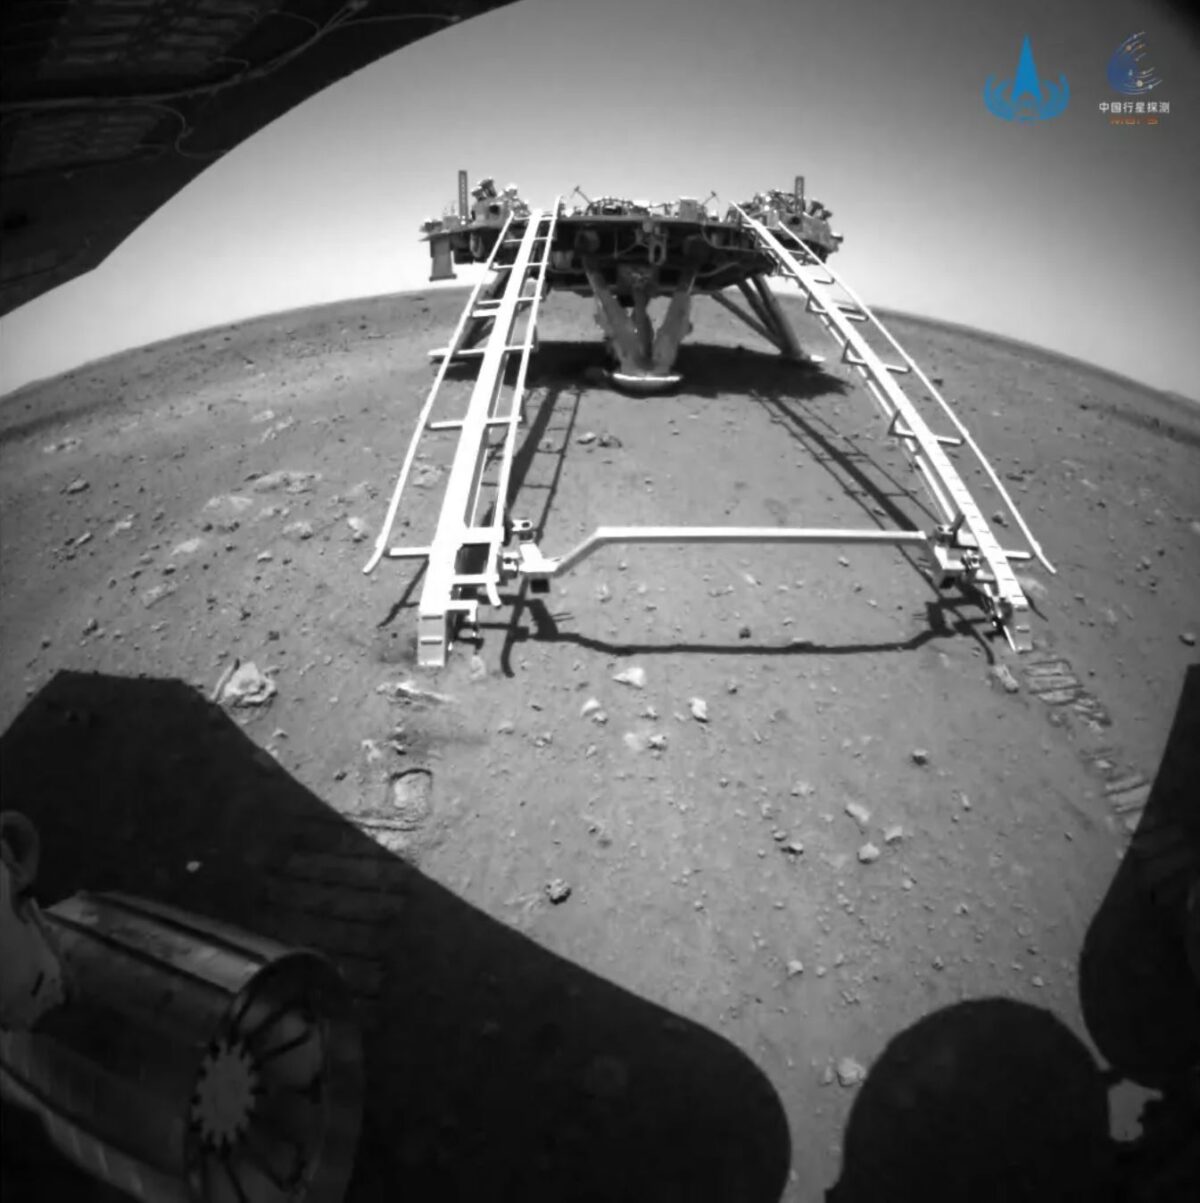 A rear hazard avoidance camera view from Zhurong after deployment from the lander late May 21 Eastern, 2021.